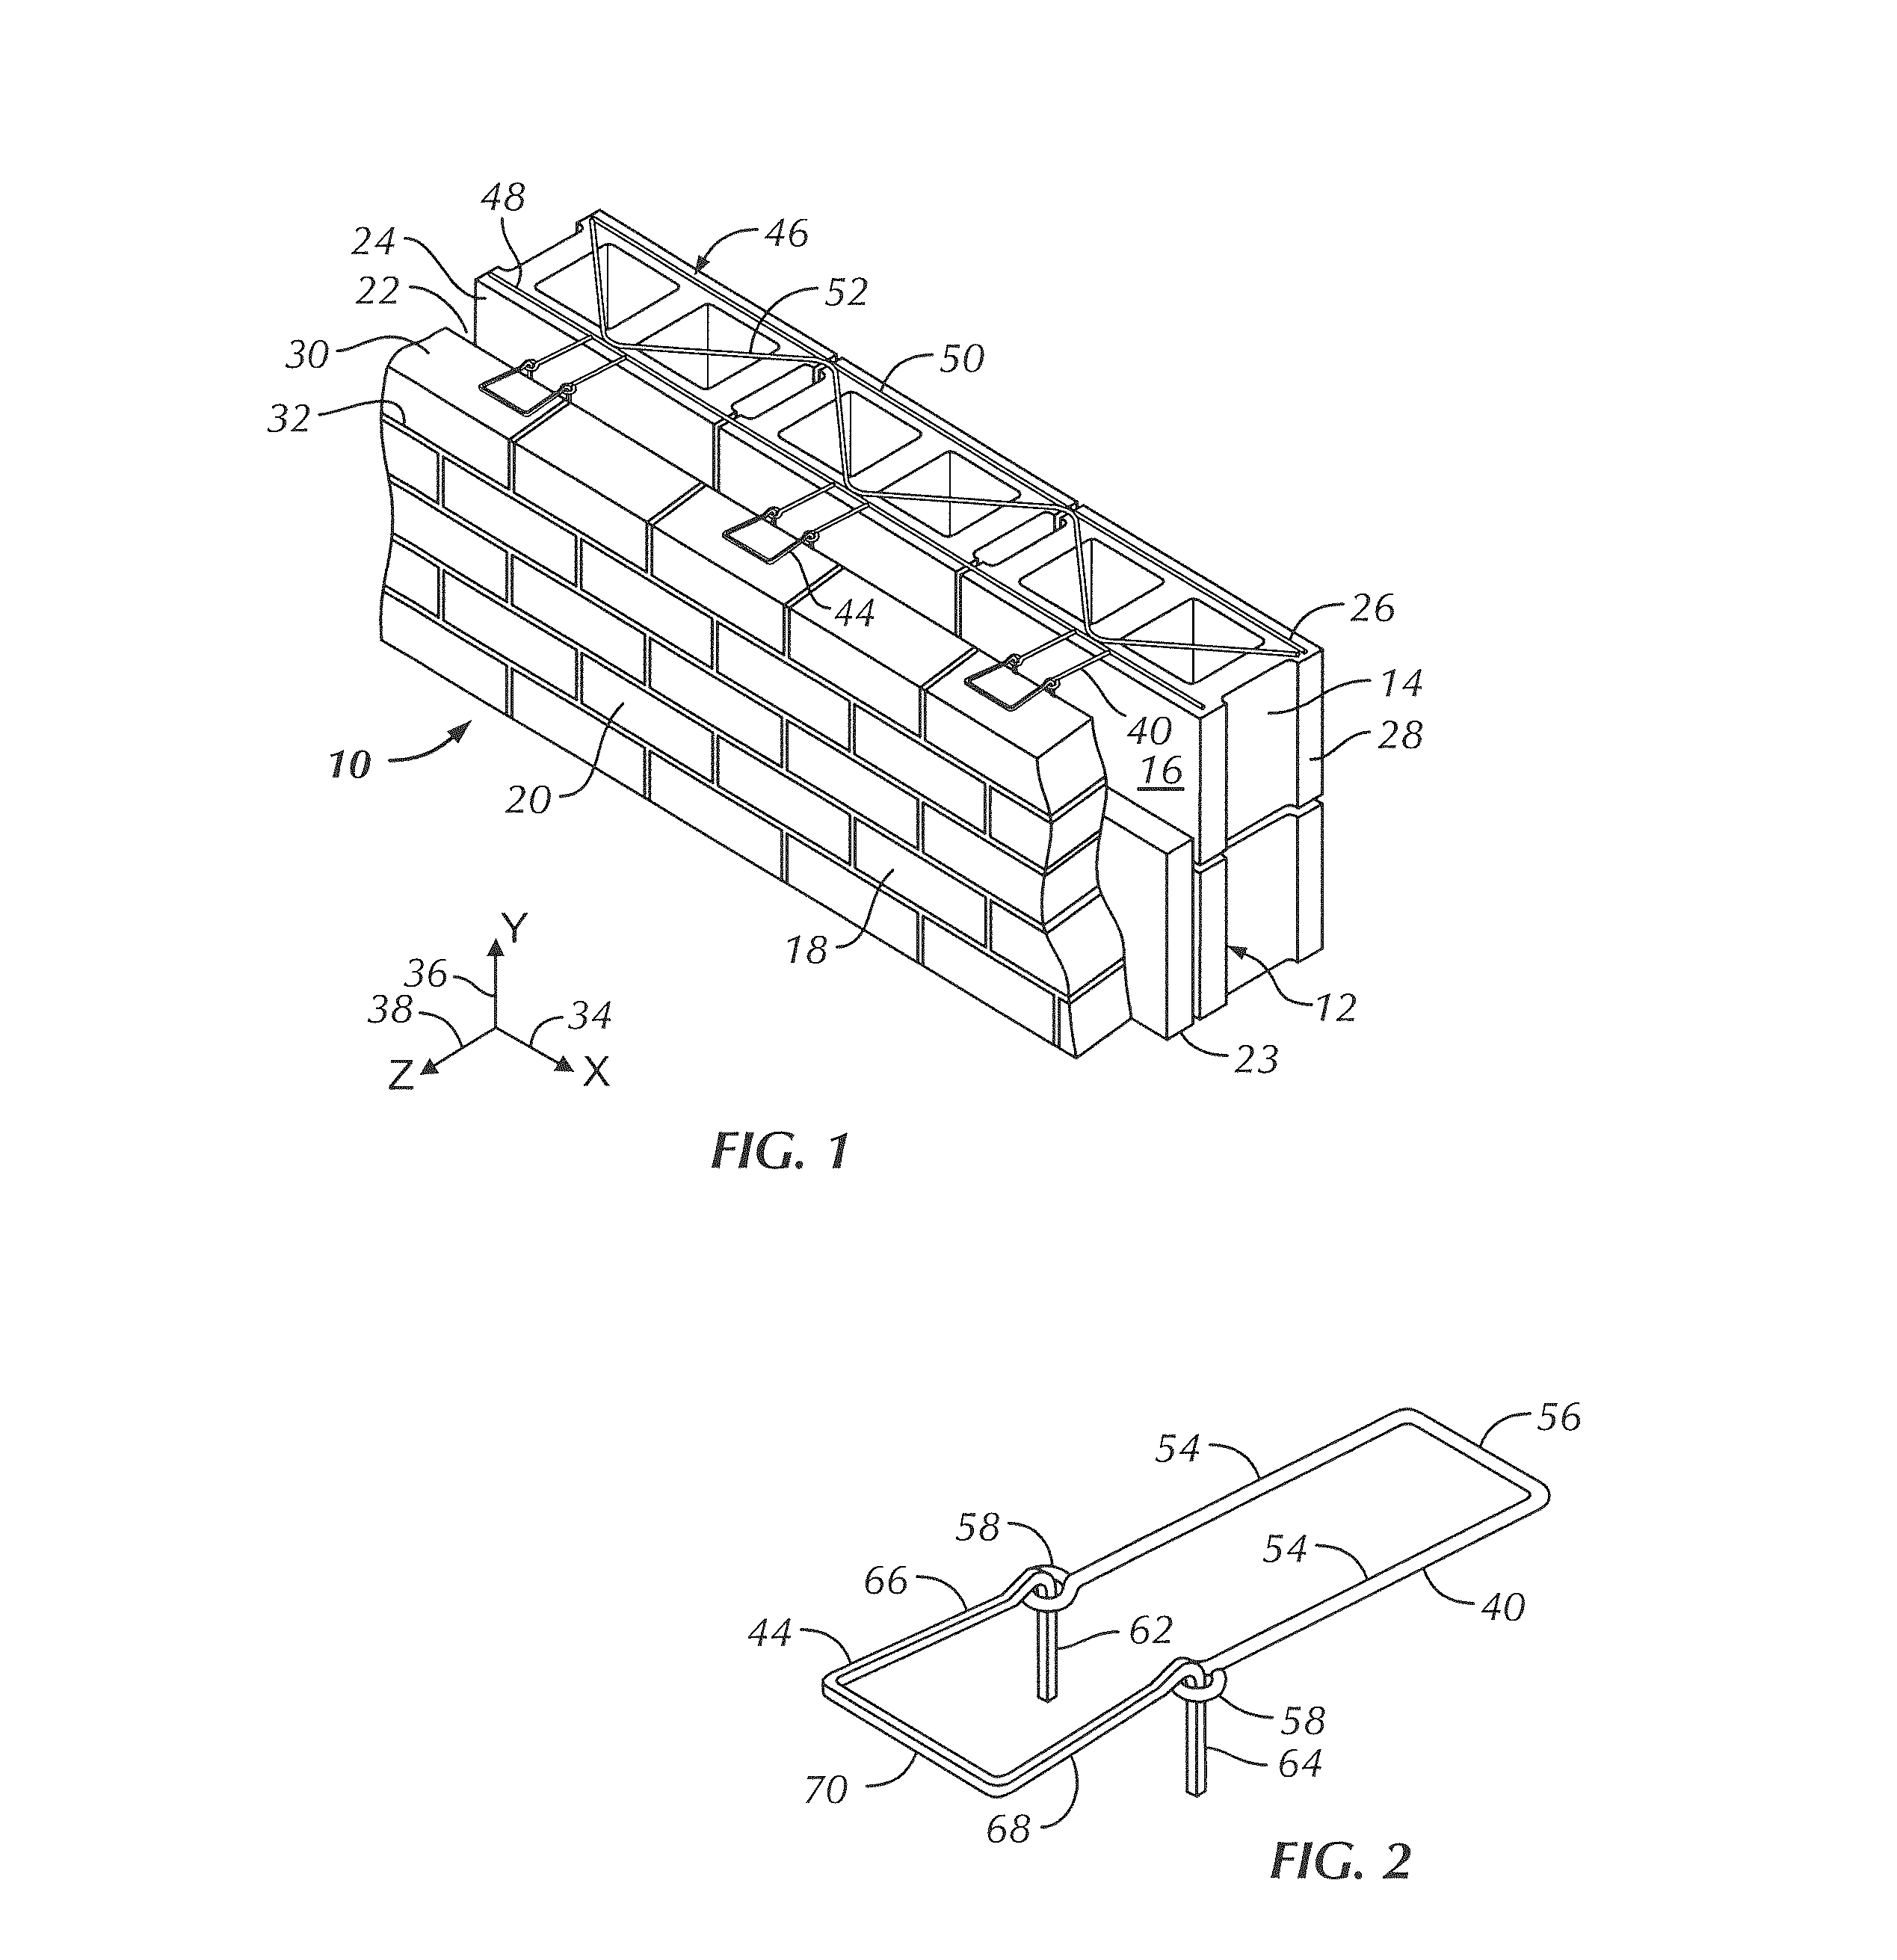 High-Strength Rectangular Wire Veneer Tie and Anchoring Systems Utilizing the Same